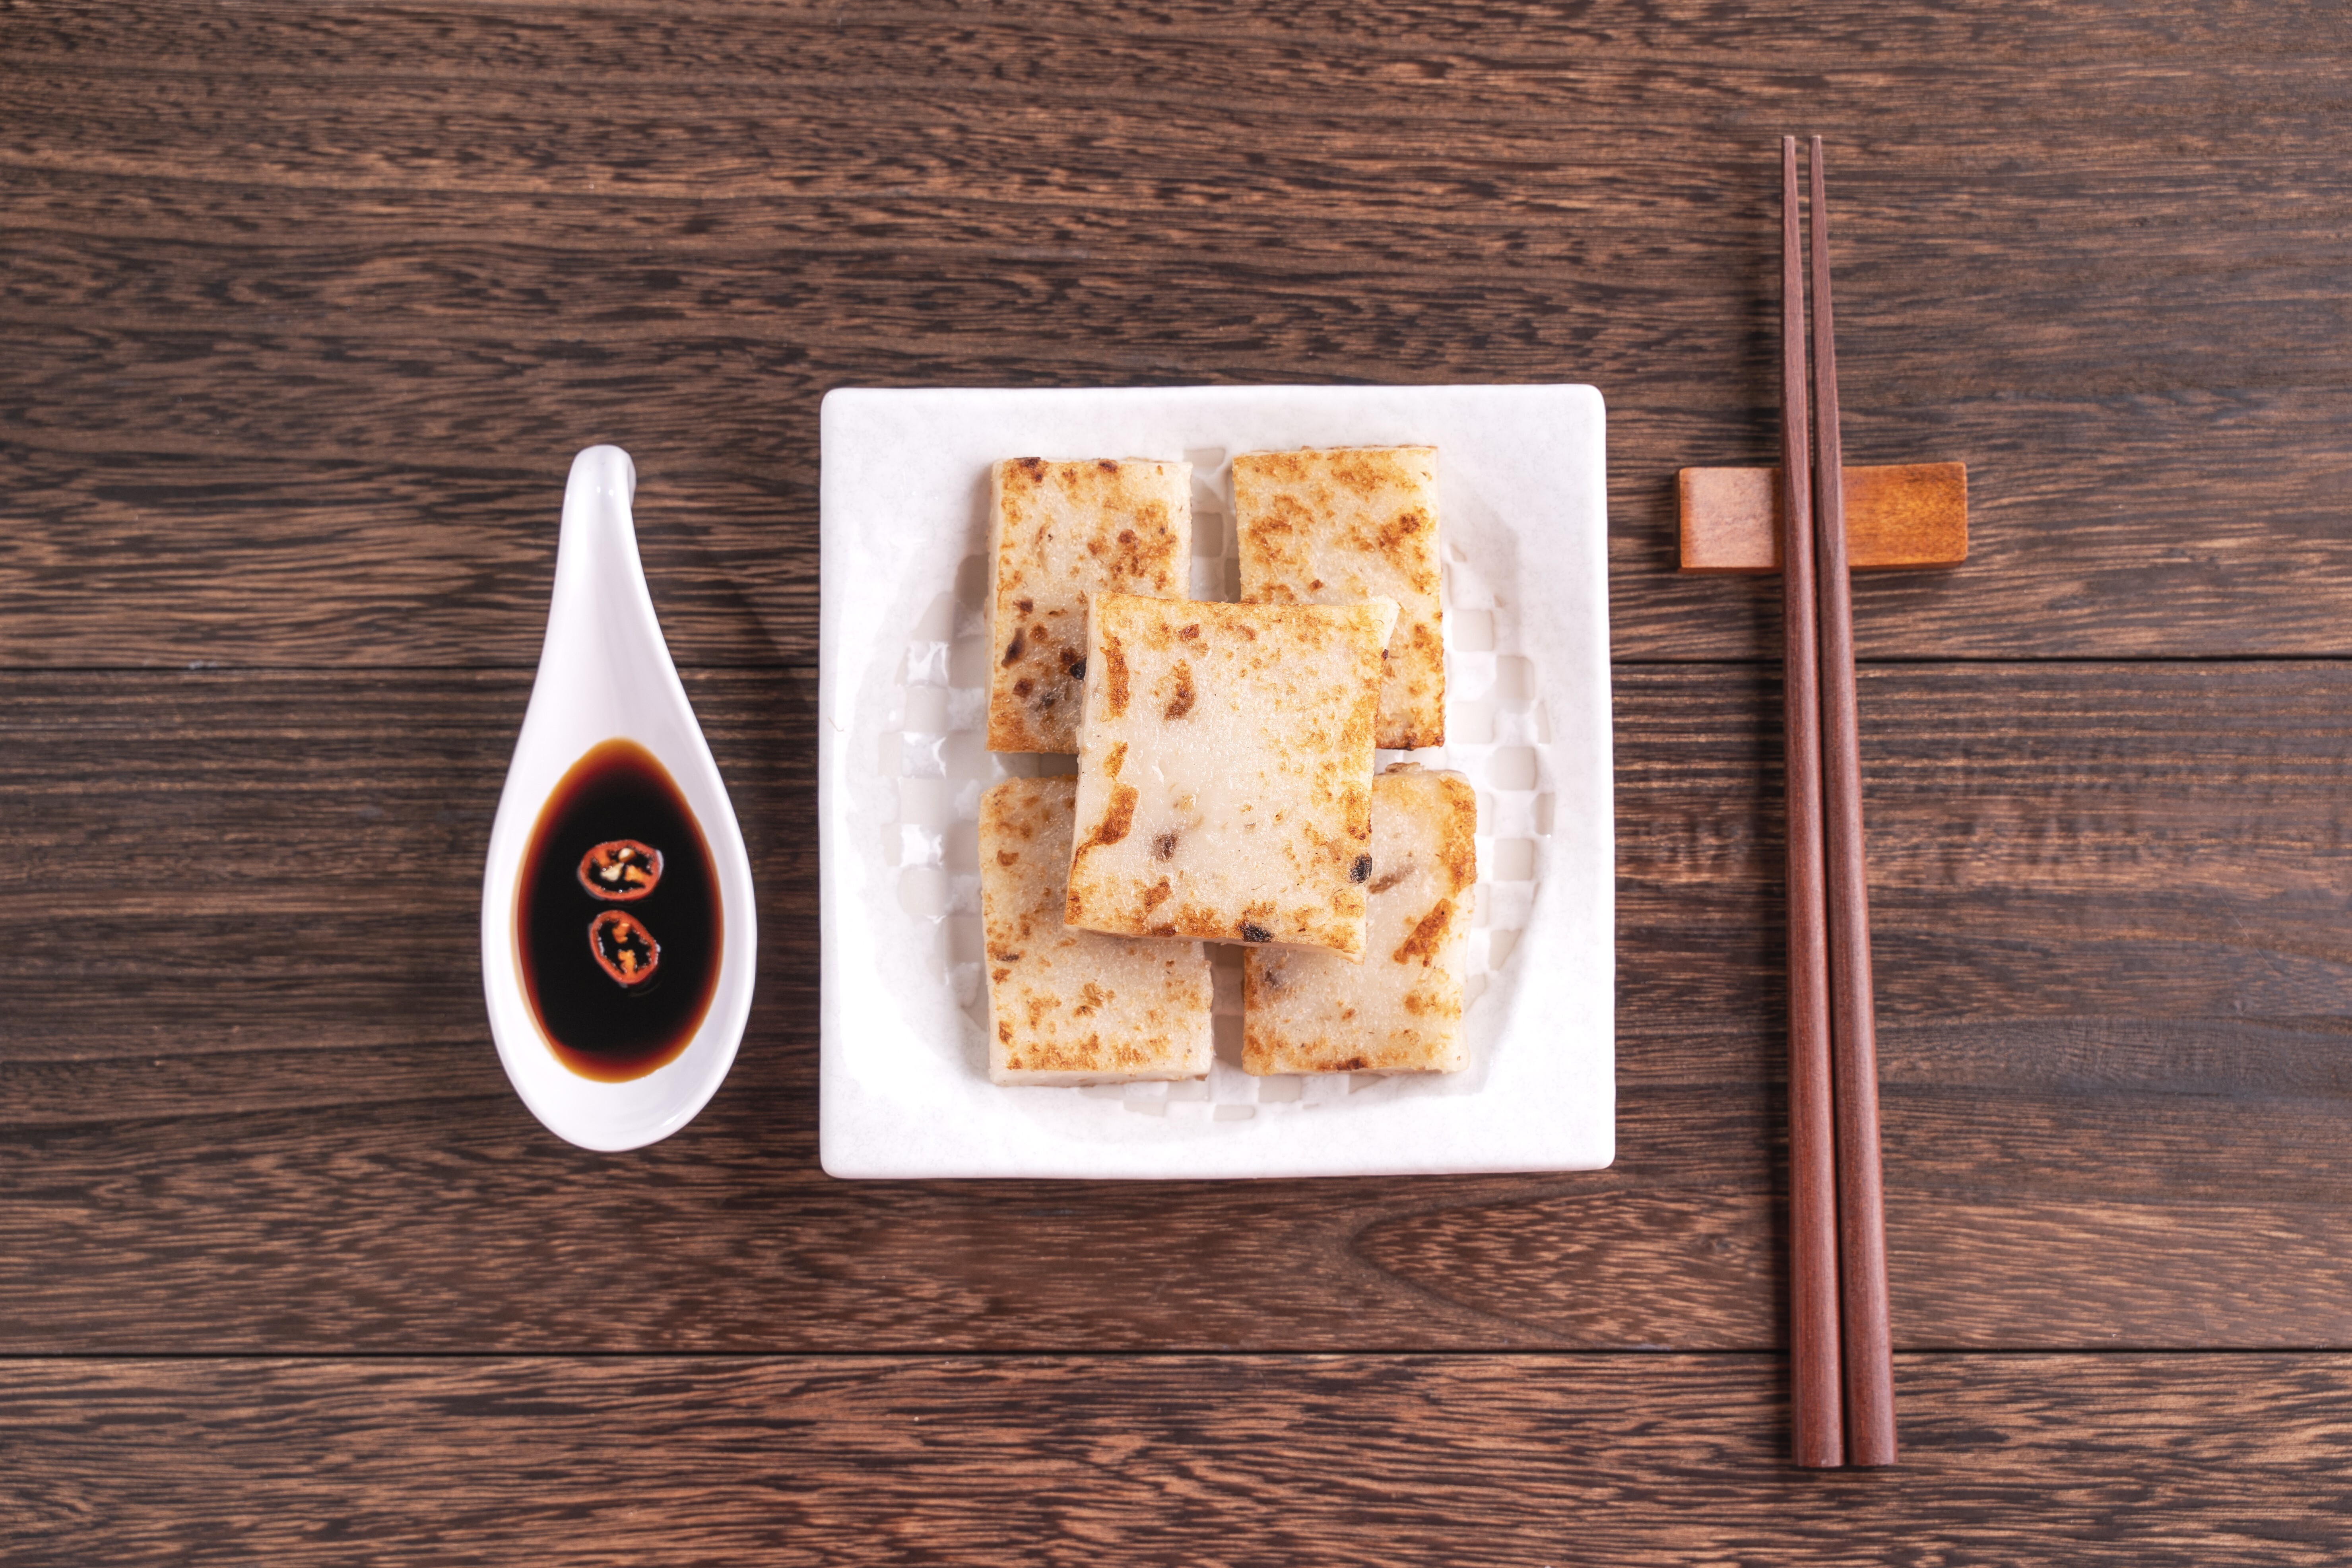 Turnip cake, a Chinese traditional local radish cake, is believed to bring luck during Lunar New Year. Photo: Getty Images